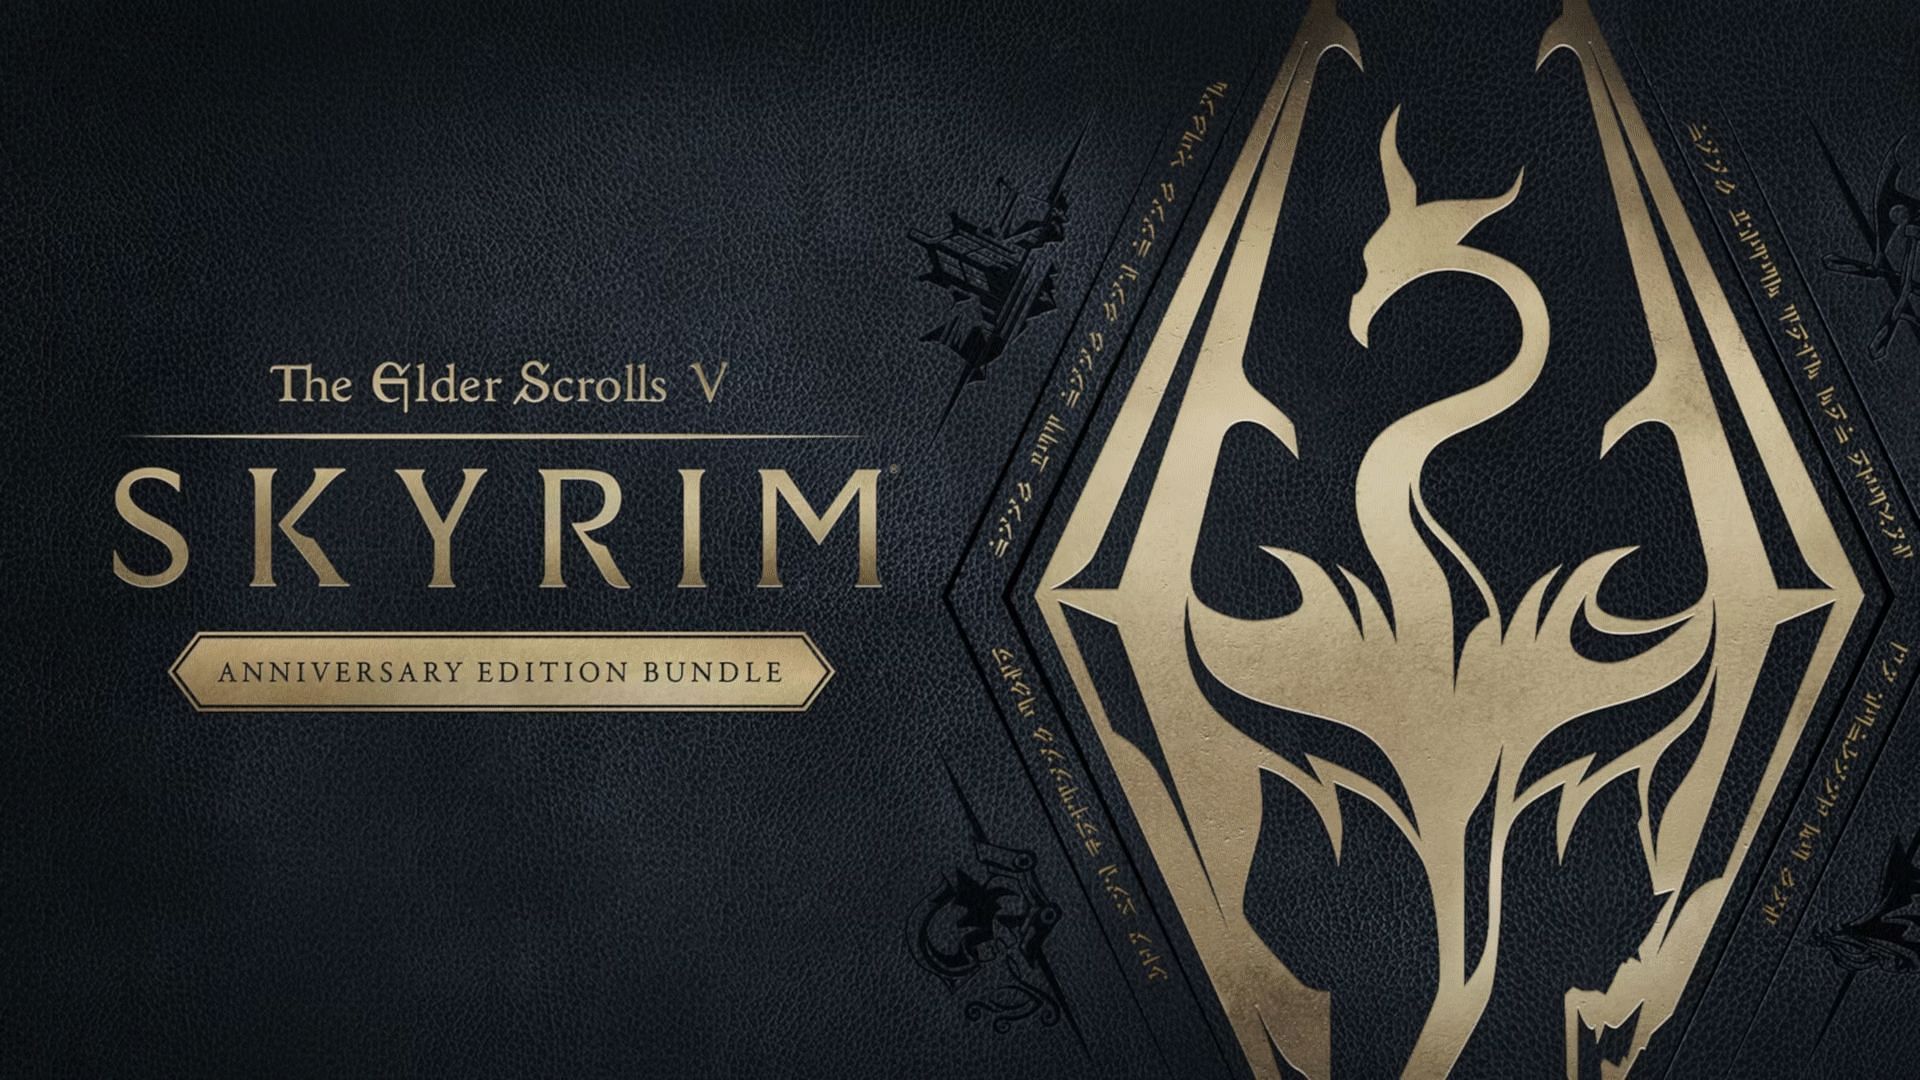 Skyrim Anniversary Edition was released in November 2021 (image via Bethesda Softworks)